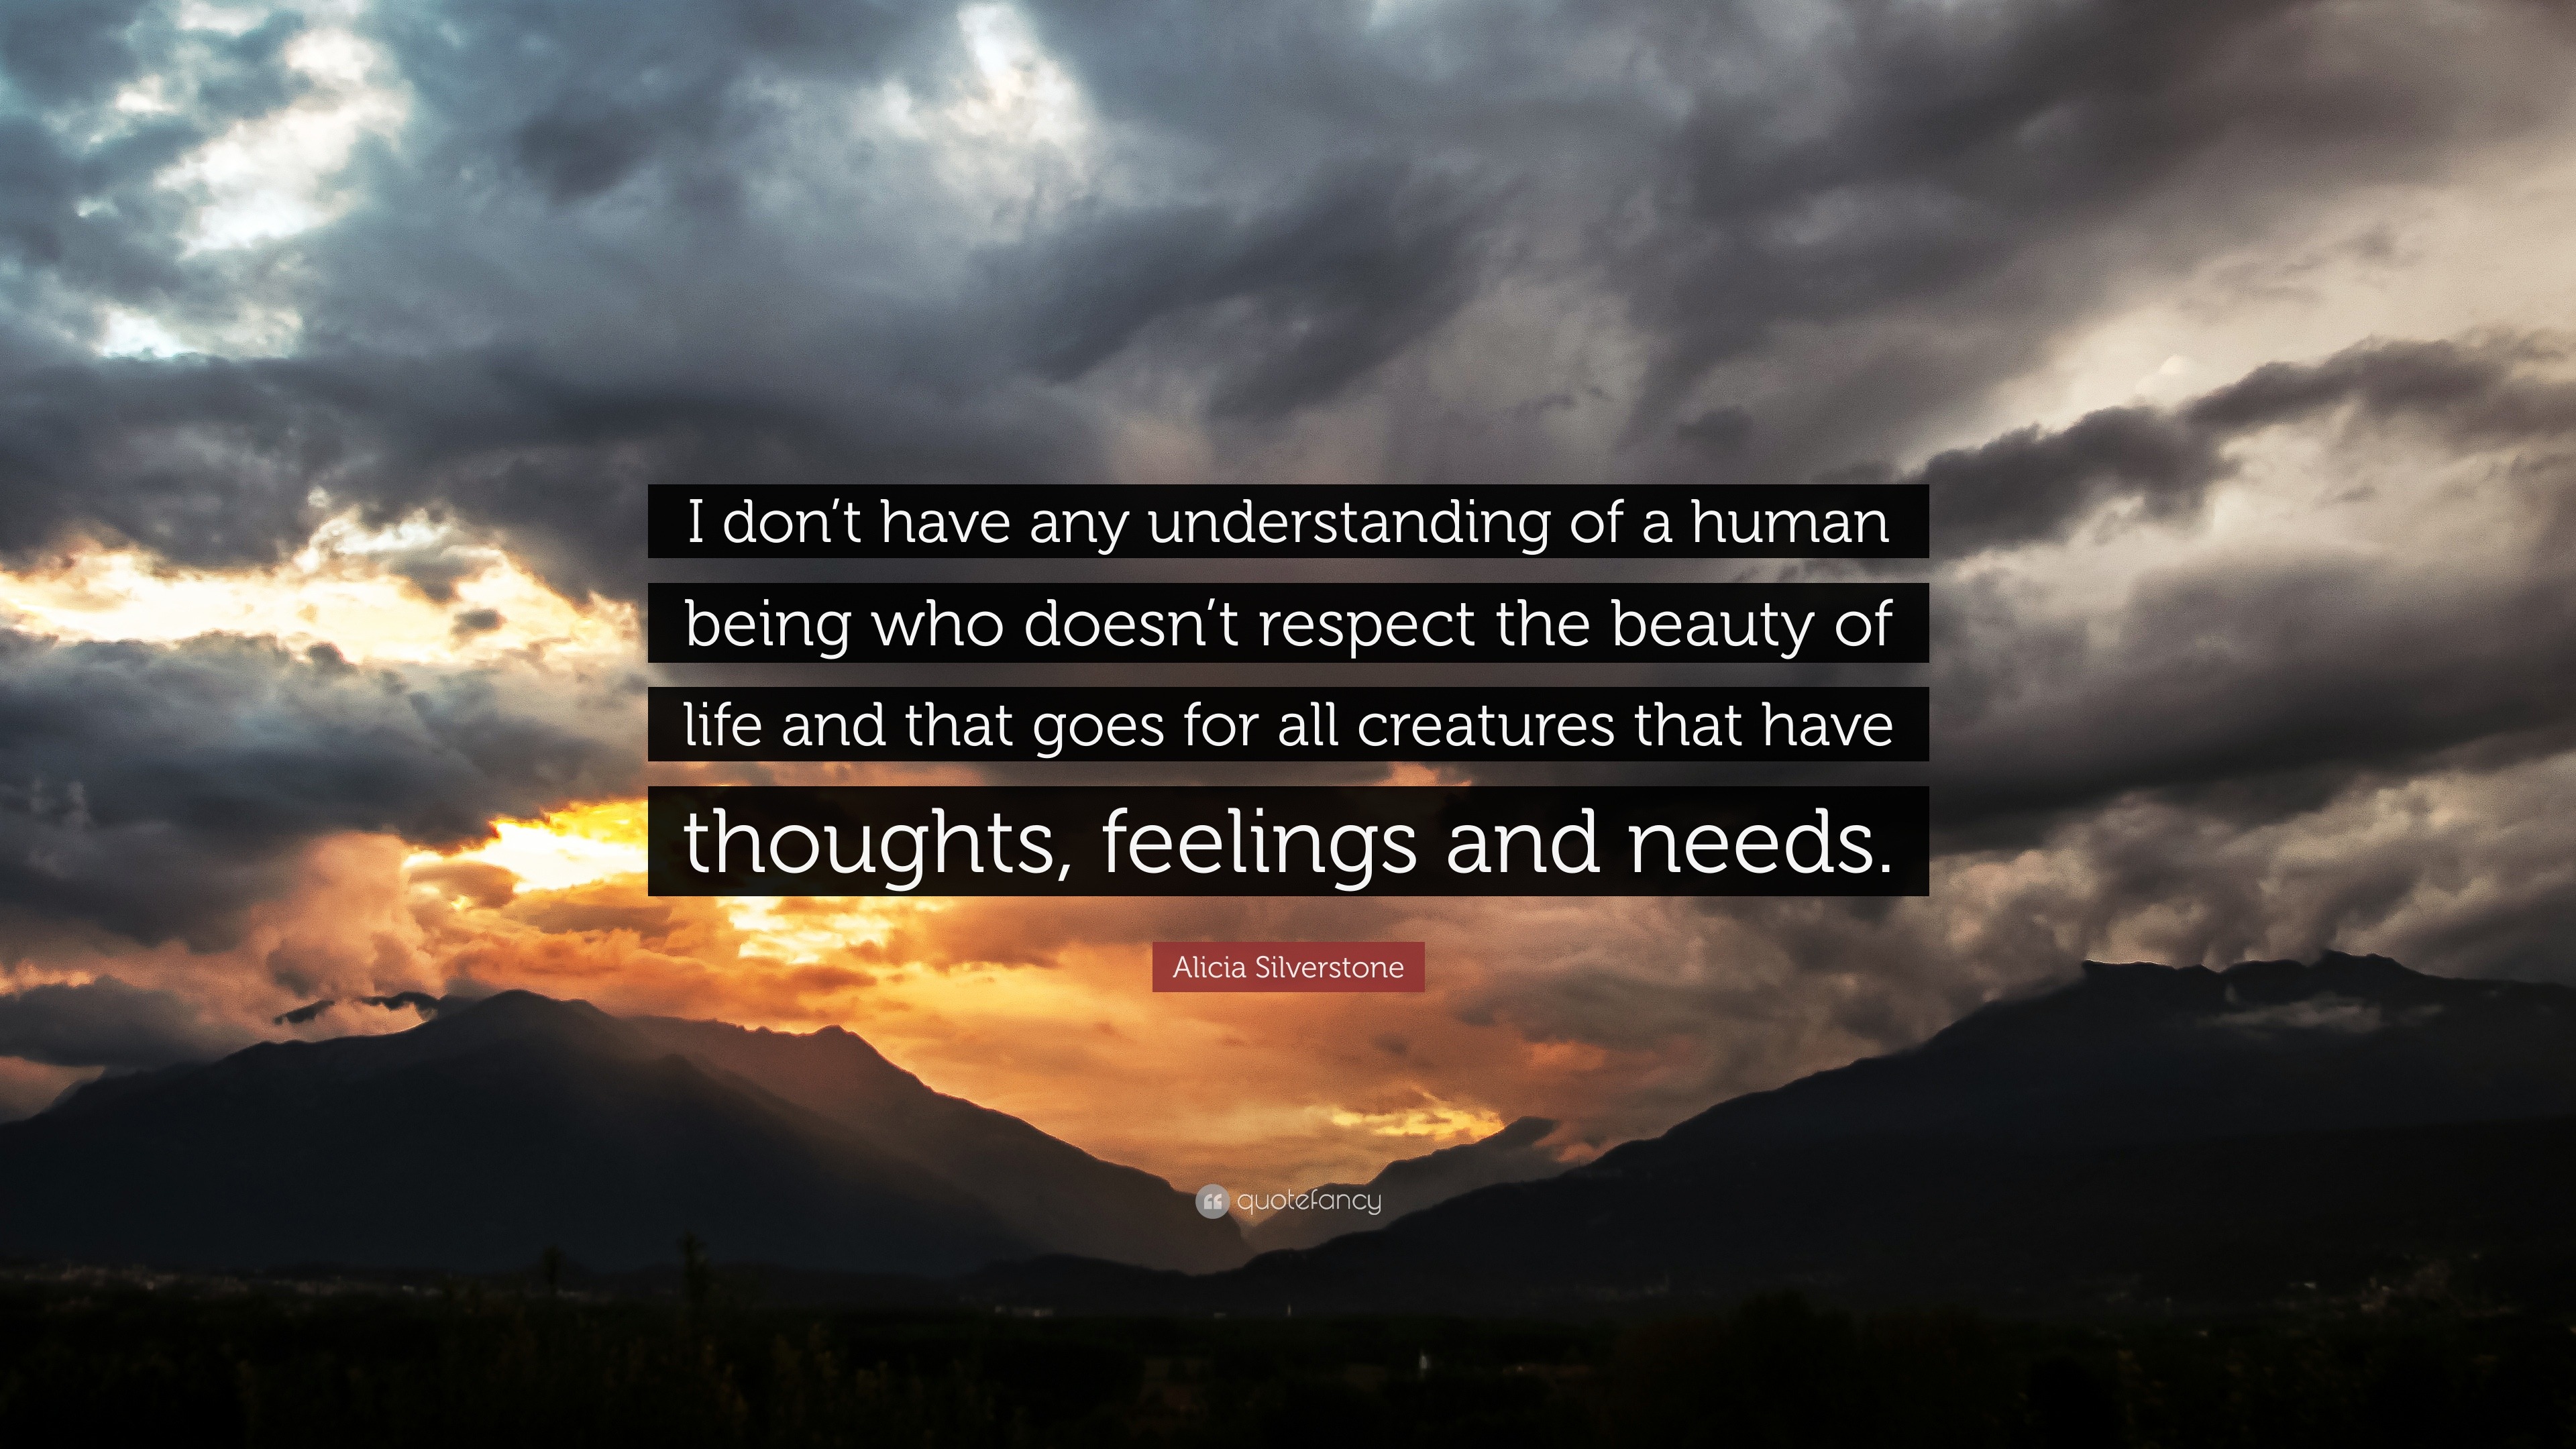 Alicia Silverstone Quote: “I don’t have any understanding of a human ...